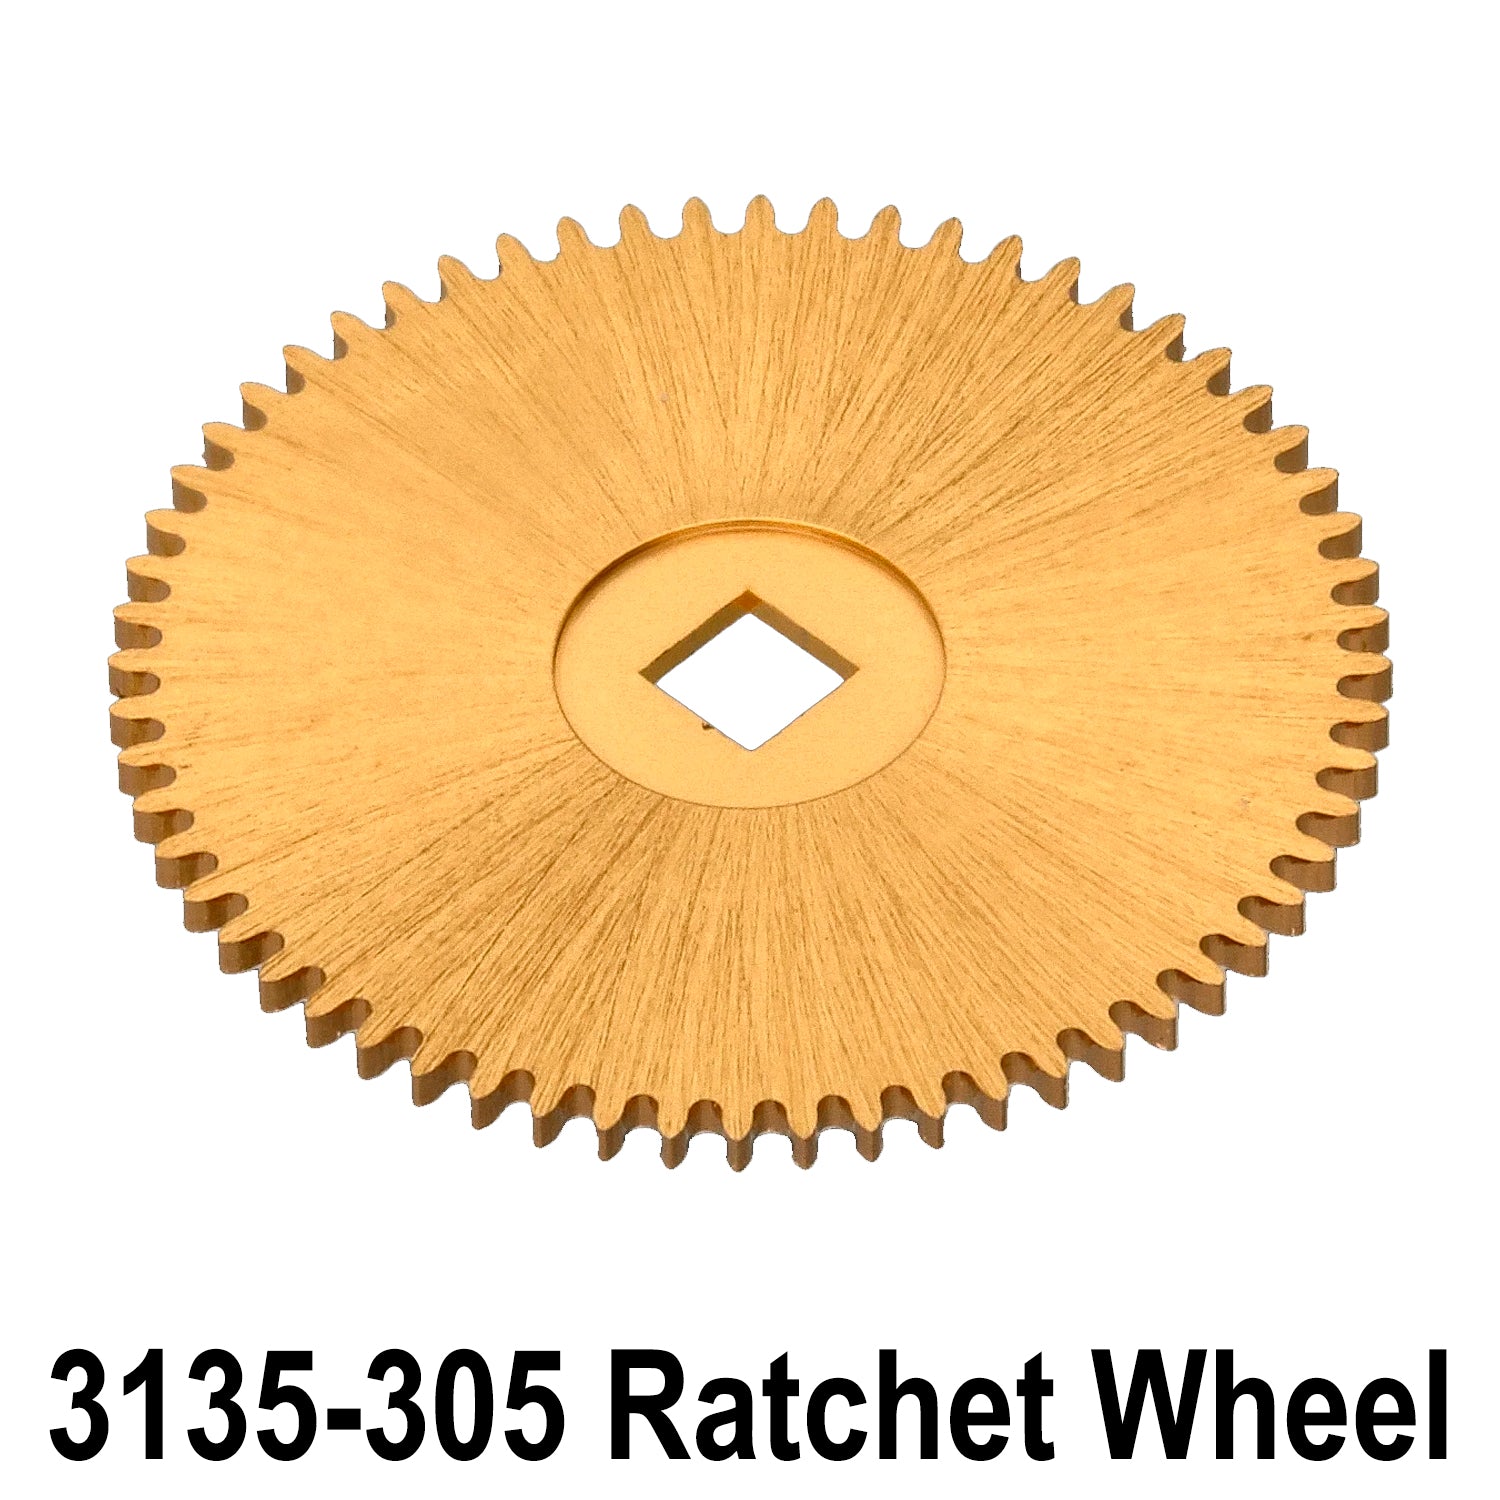 Internal Parts to fit Rolex 31 Series Calibers 3130 - 3186